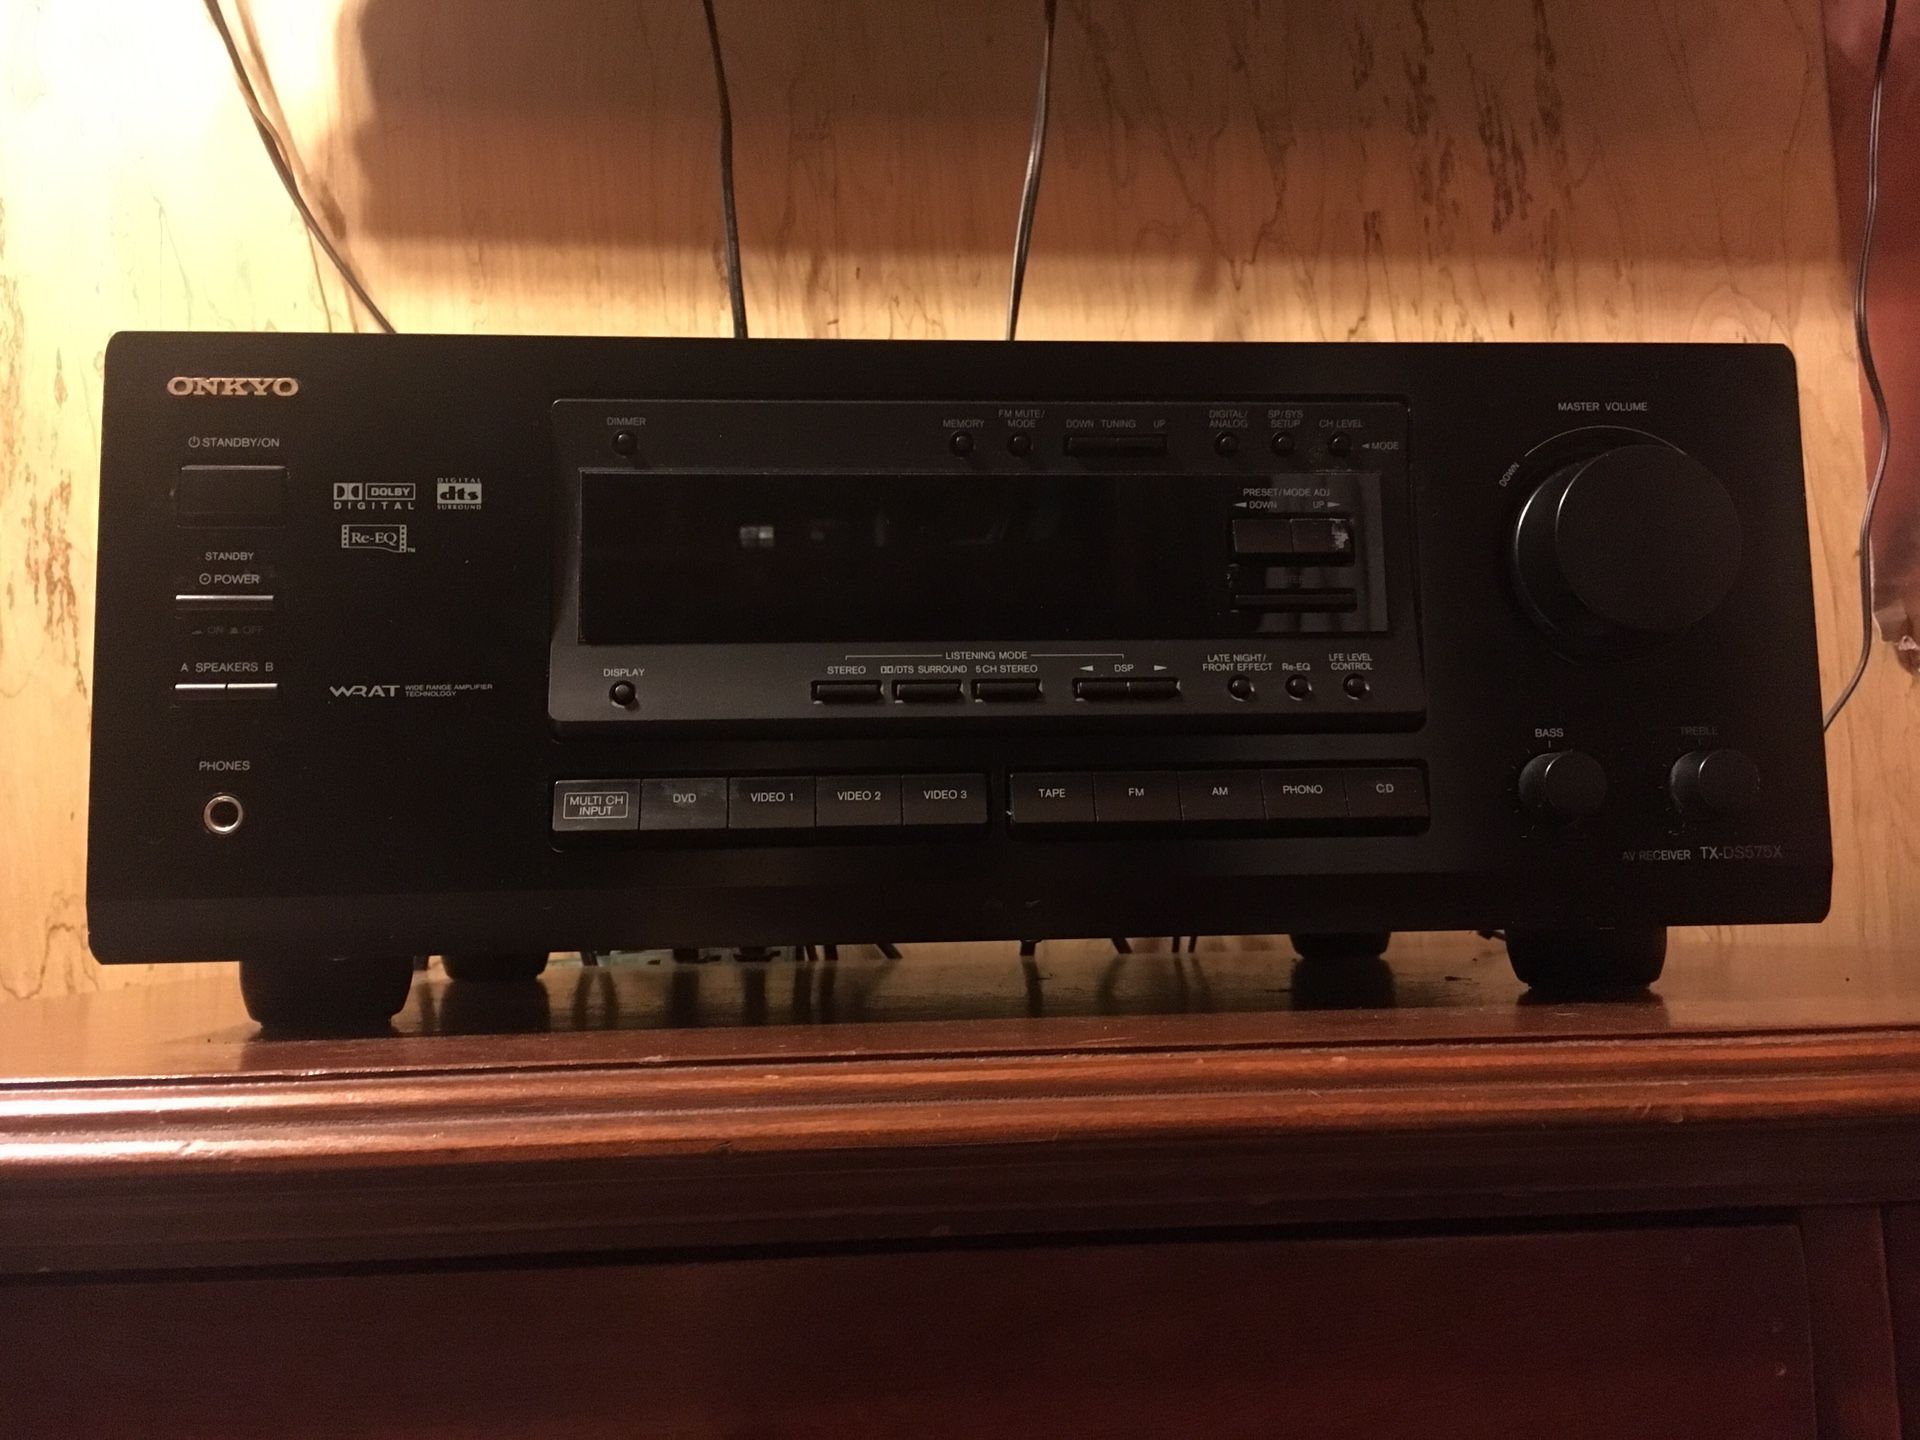 Onkyo receiver and a DCM Subwoofer